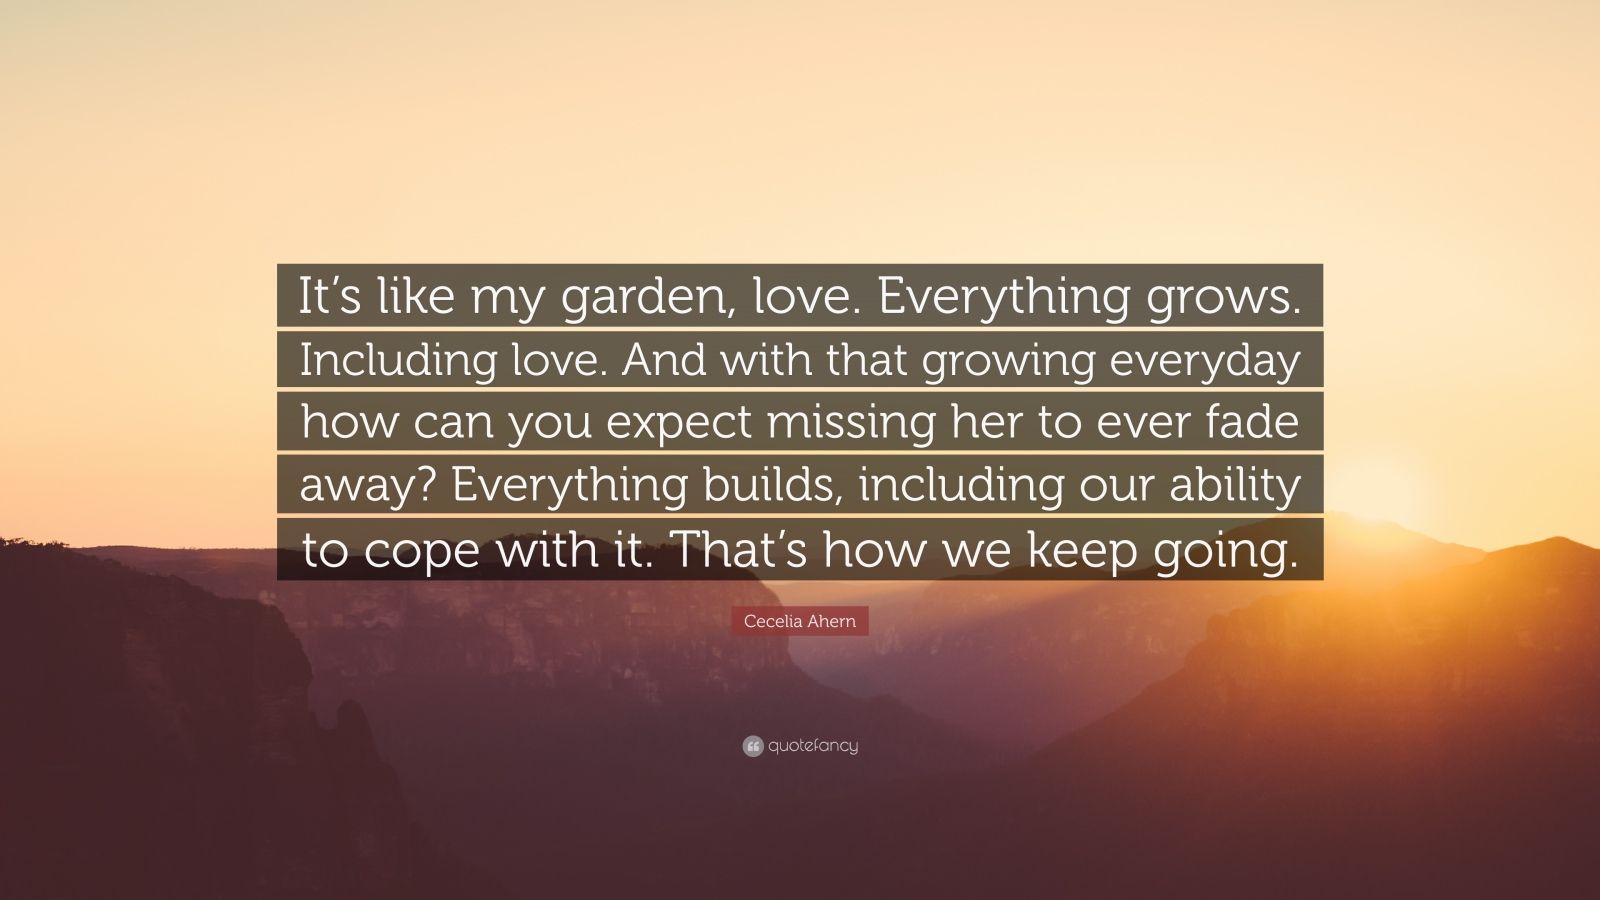 Cecelia Ahern Quote “It s like my garden love Everything grows Including